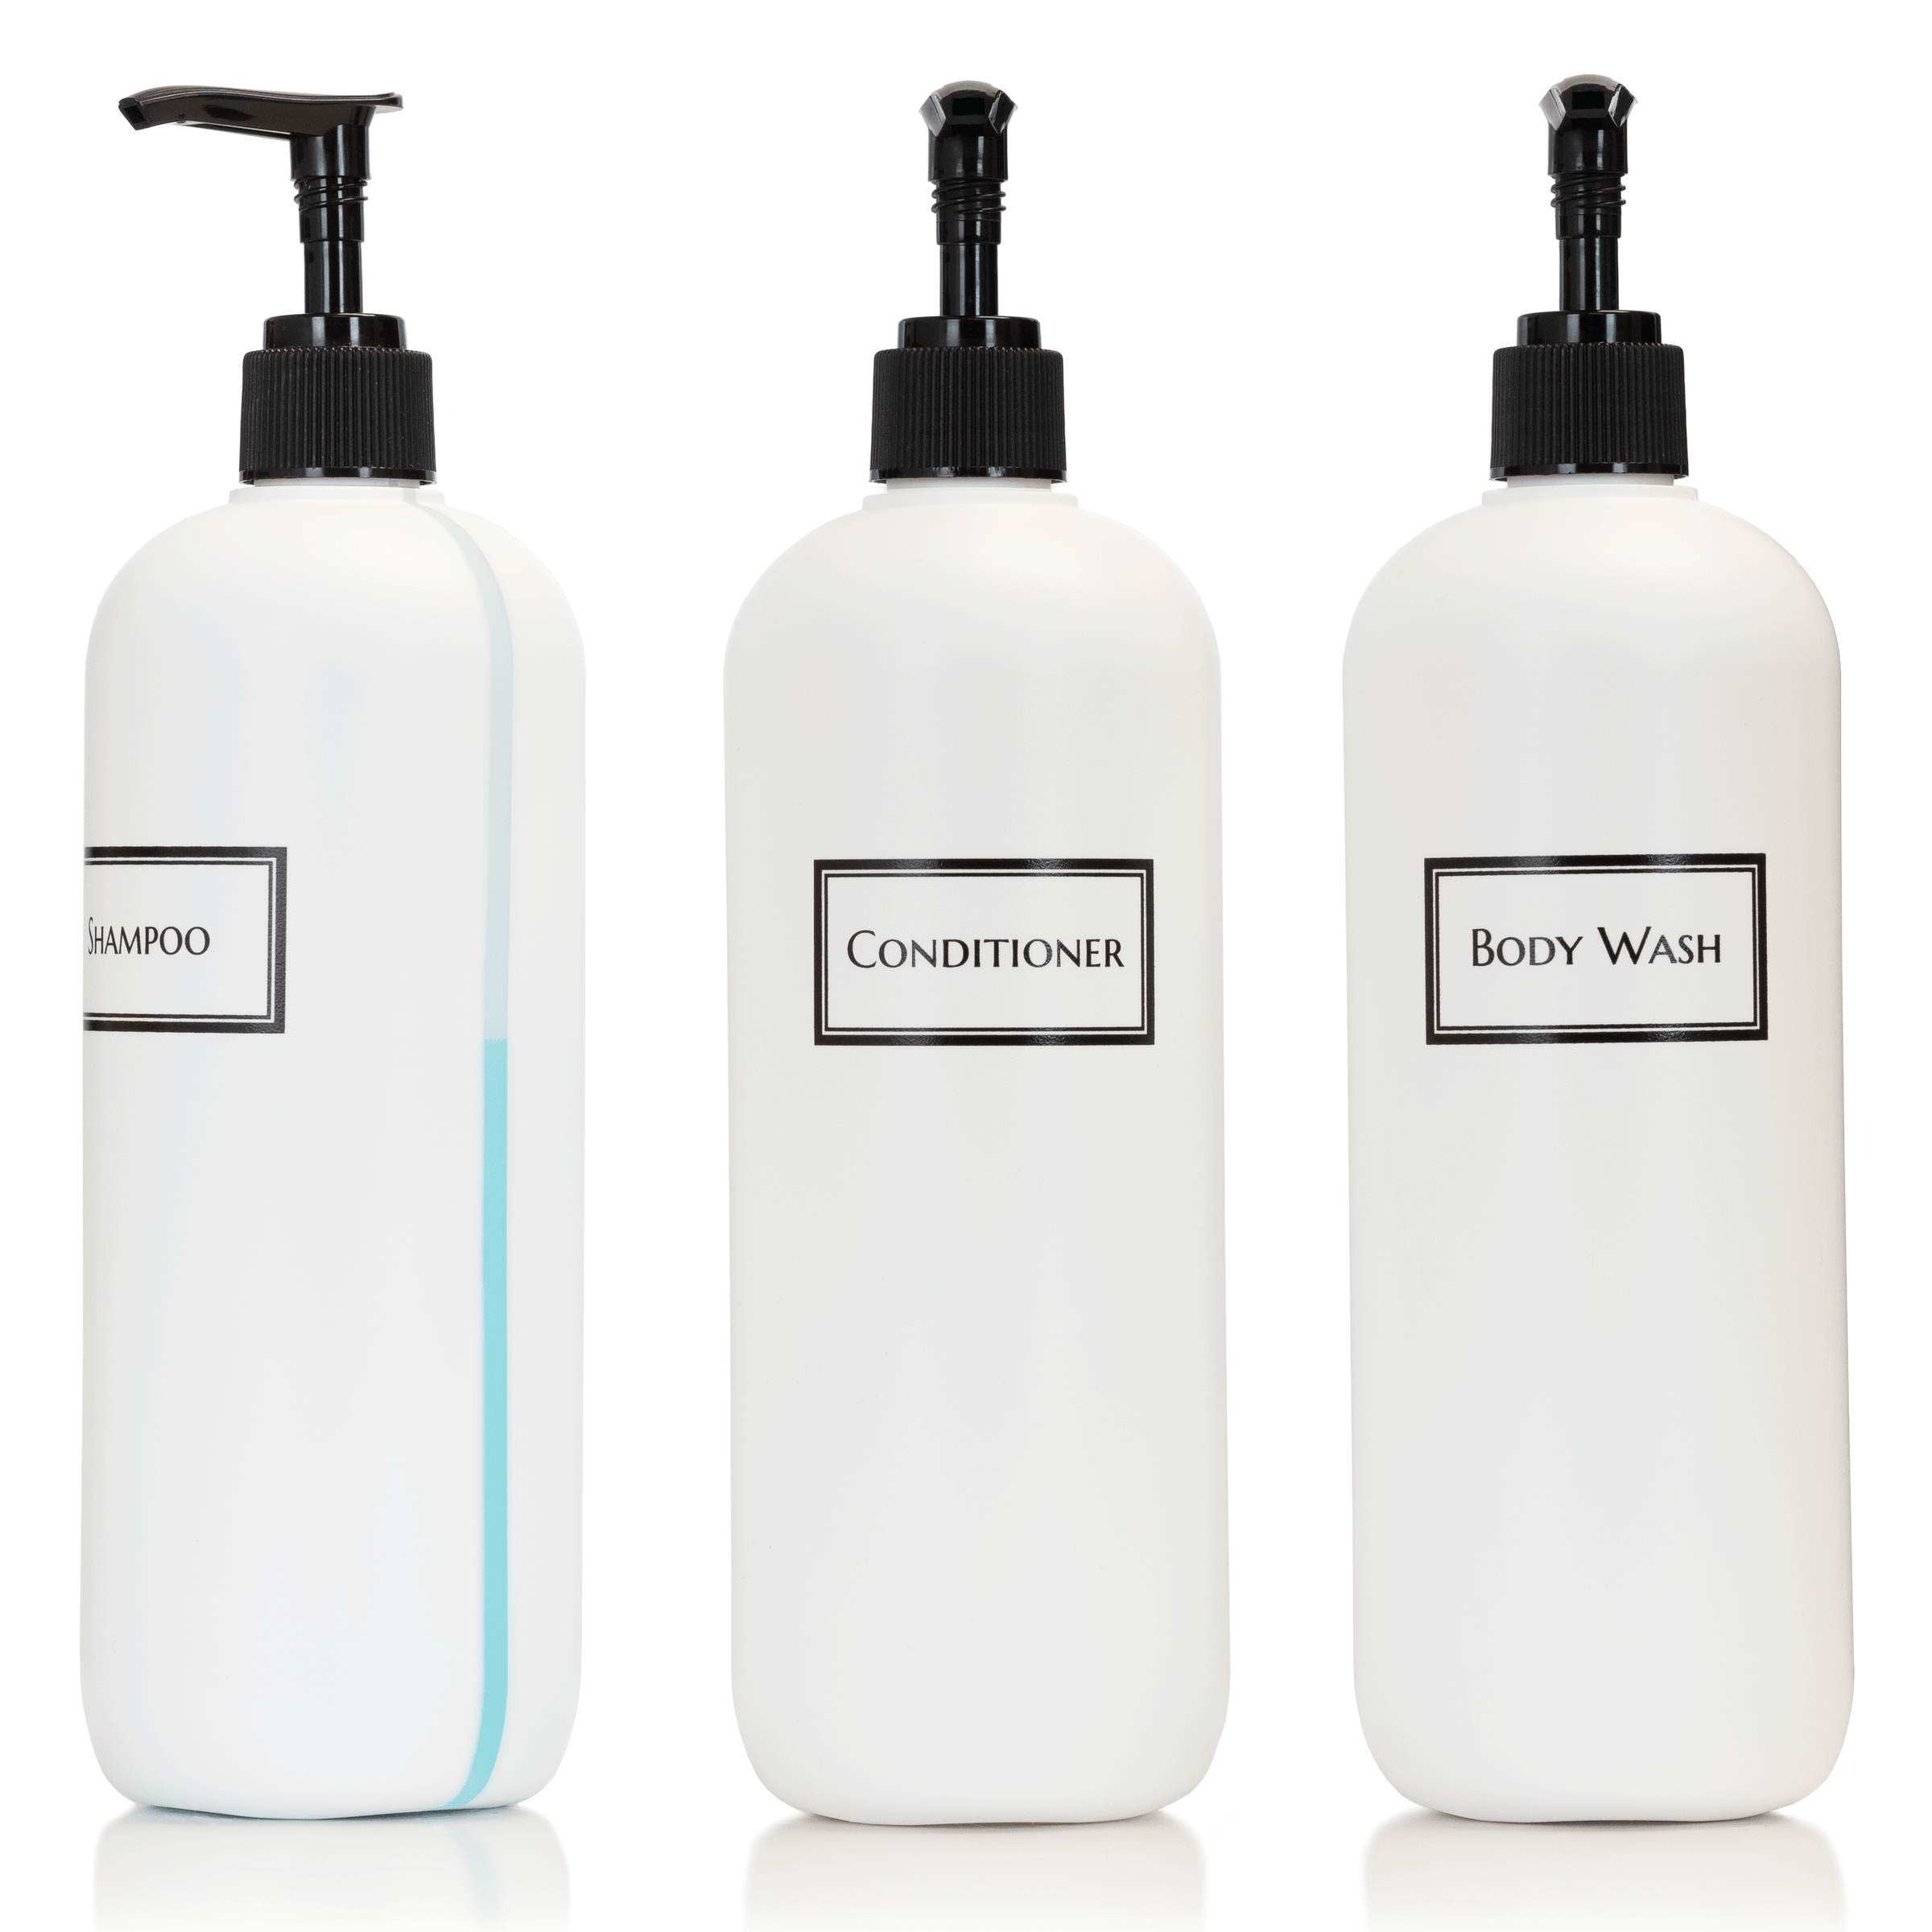 Set of three 19 oz view stripe bottles with printed "Shampoo" "Conditioner" and "Body Wash" text and black pumps. Creates a designer, decluttered shower. Easily view the fill level.